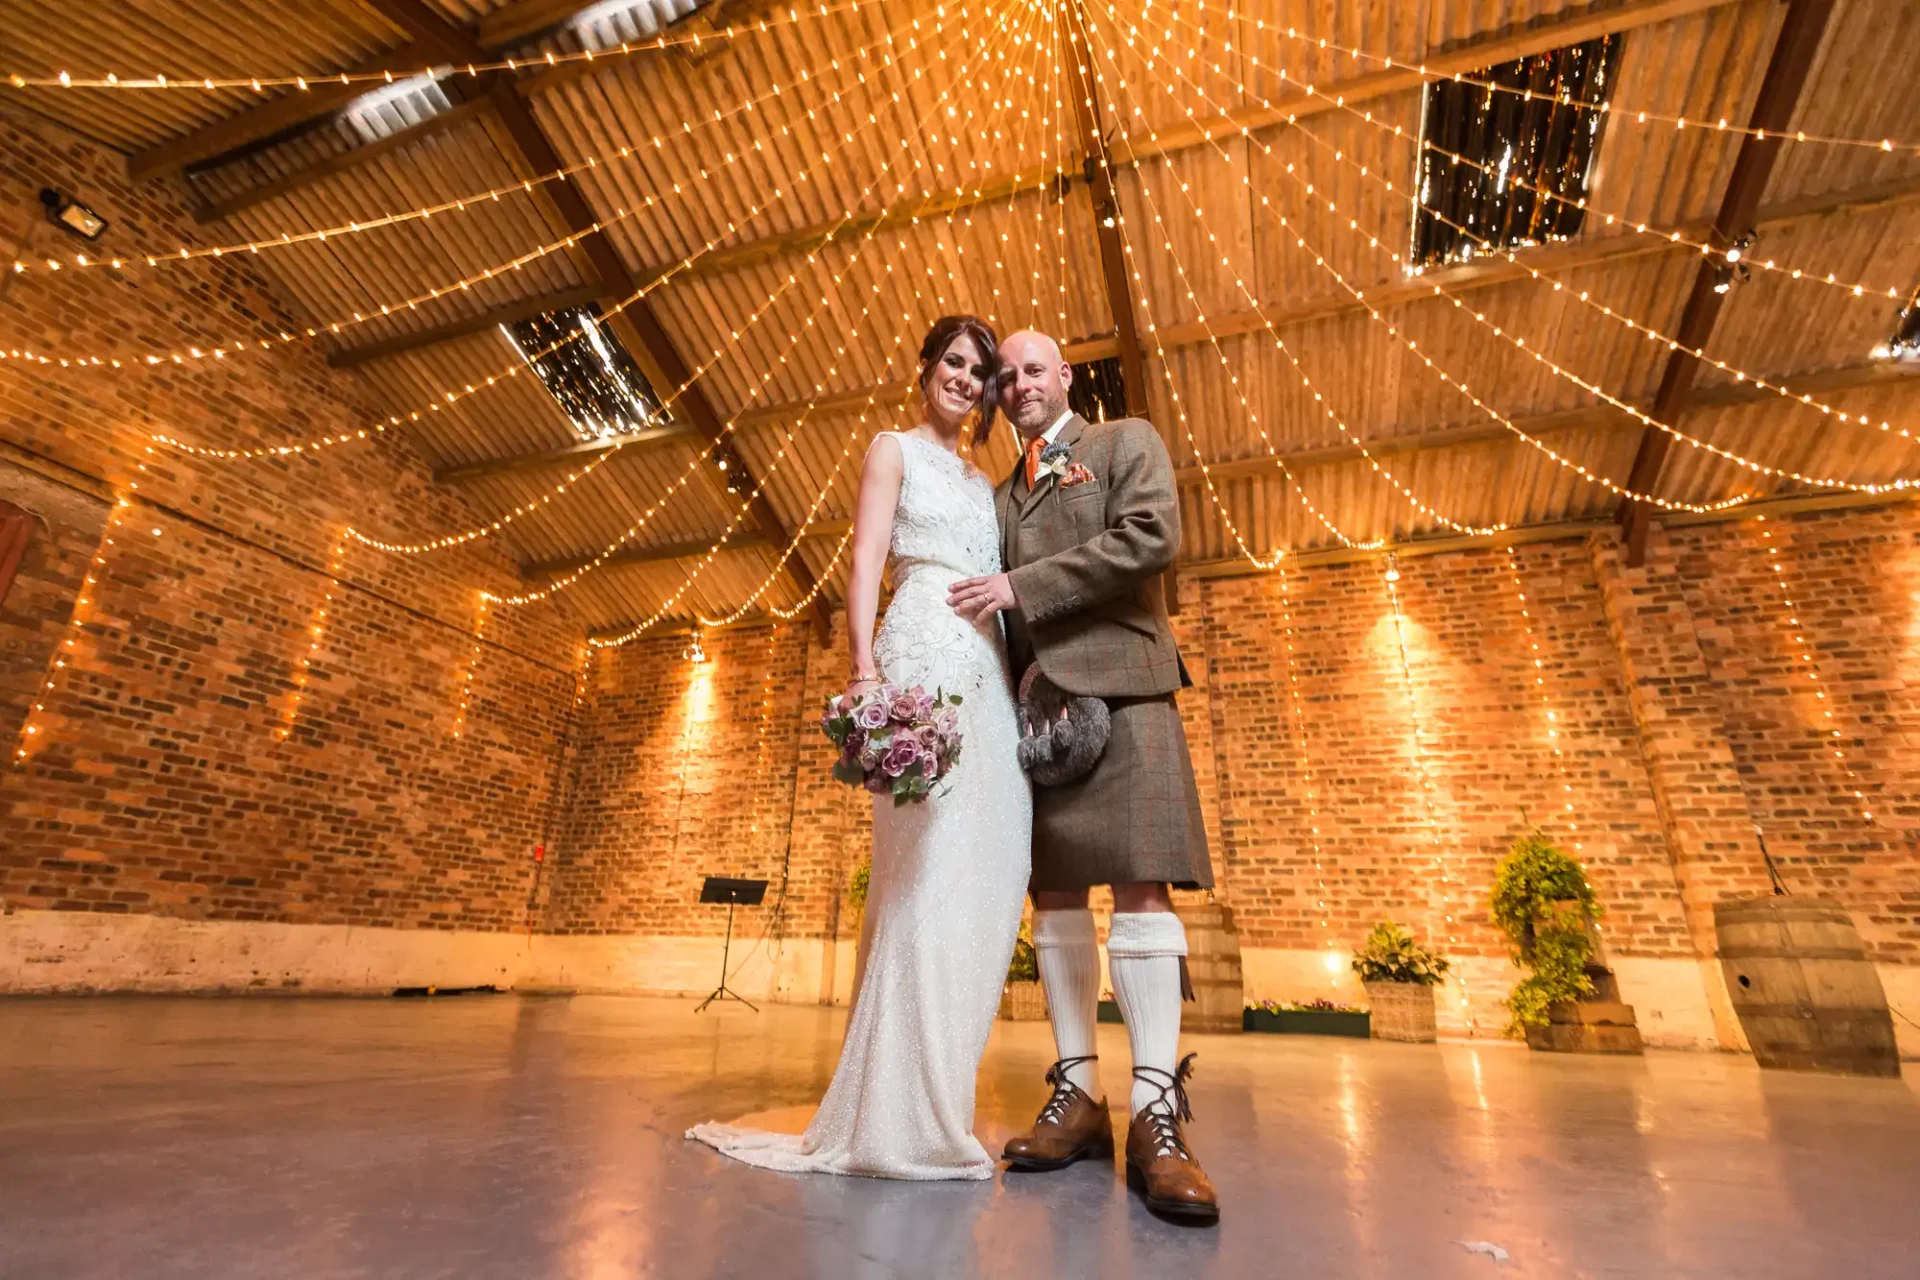 A bride and groom smiling while posing in a rustic hall adorned with fairy lights, the groom wearing traditional scottish kilt attire.